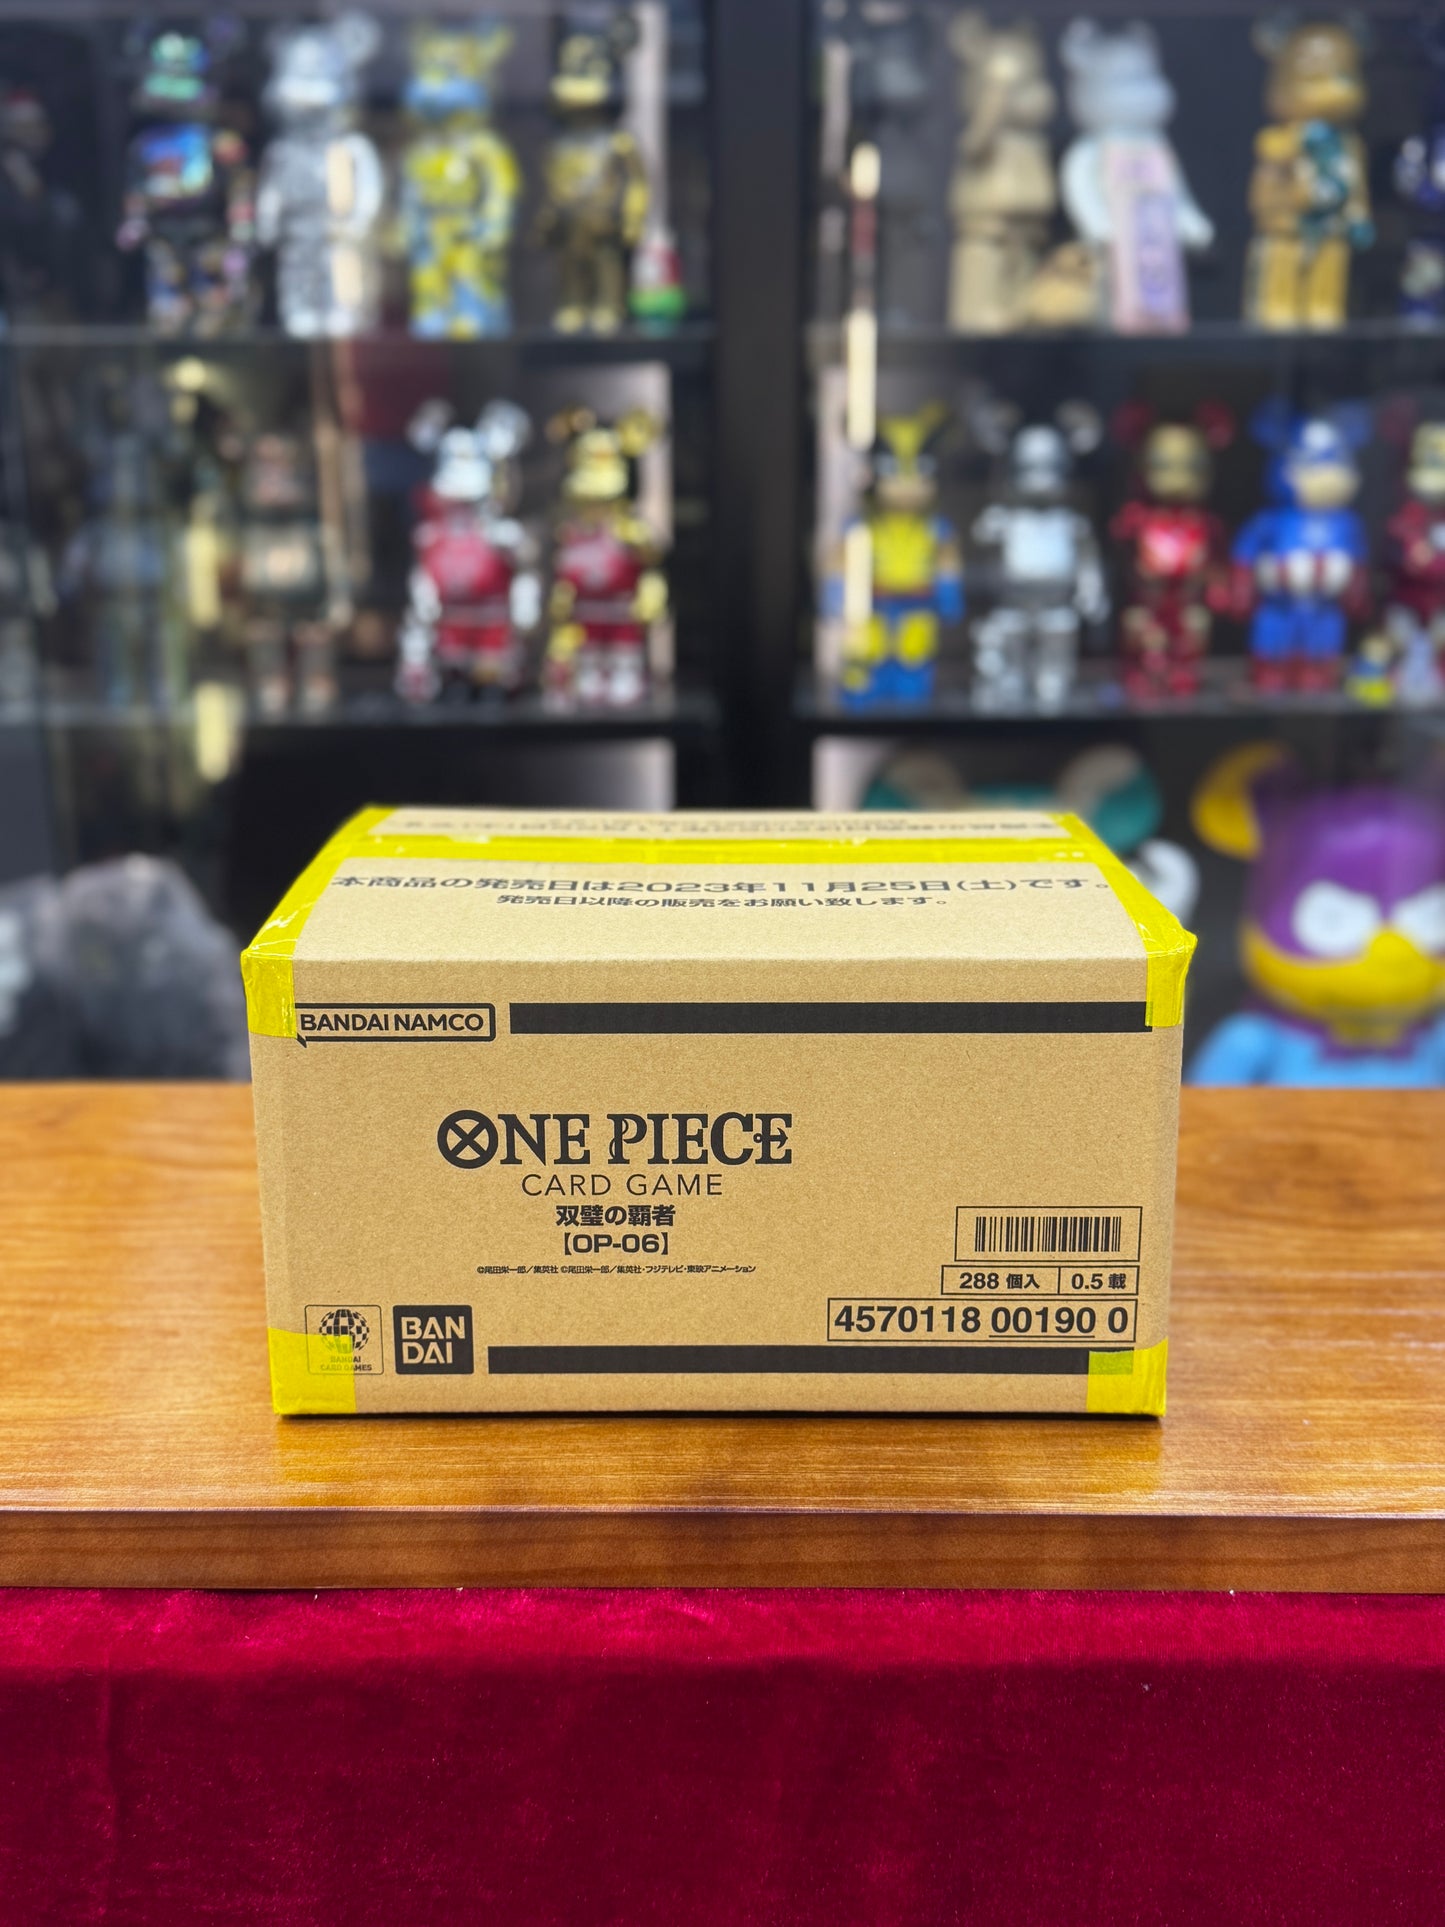 [OP-06] 双璧の覇者 One Piece Card - 原箱 (Original Box With 12 Package)